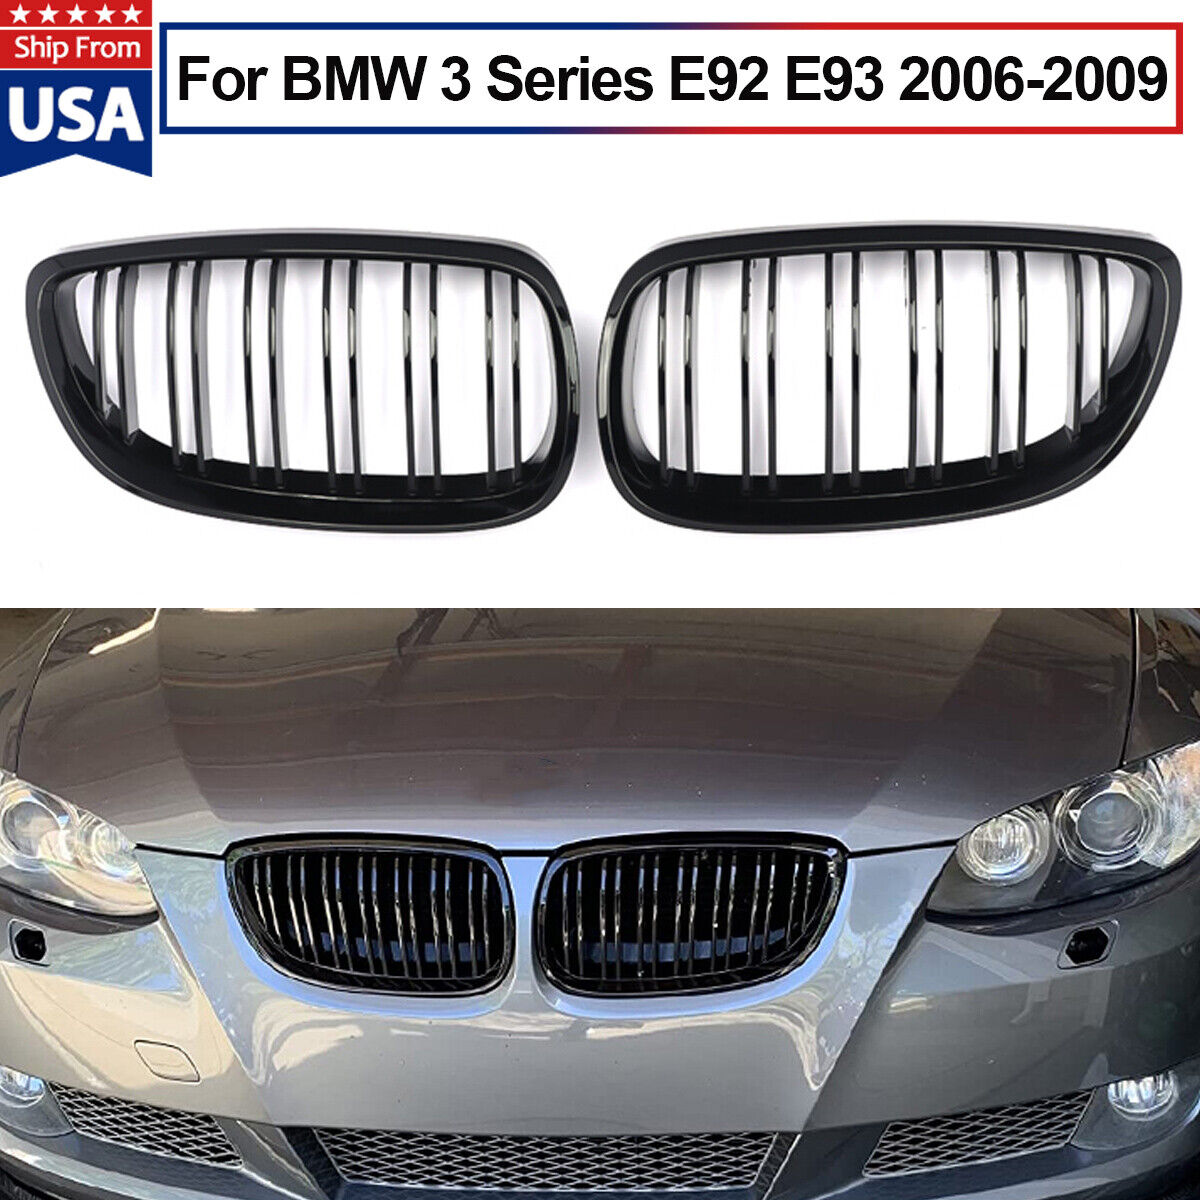 For BMW E92 E93 M3 328i 335i Coupe Pre-LCI Front Kidney Grill Grille Gloss Black